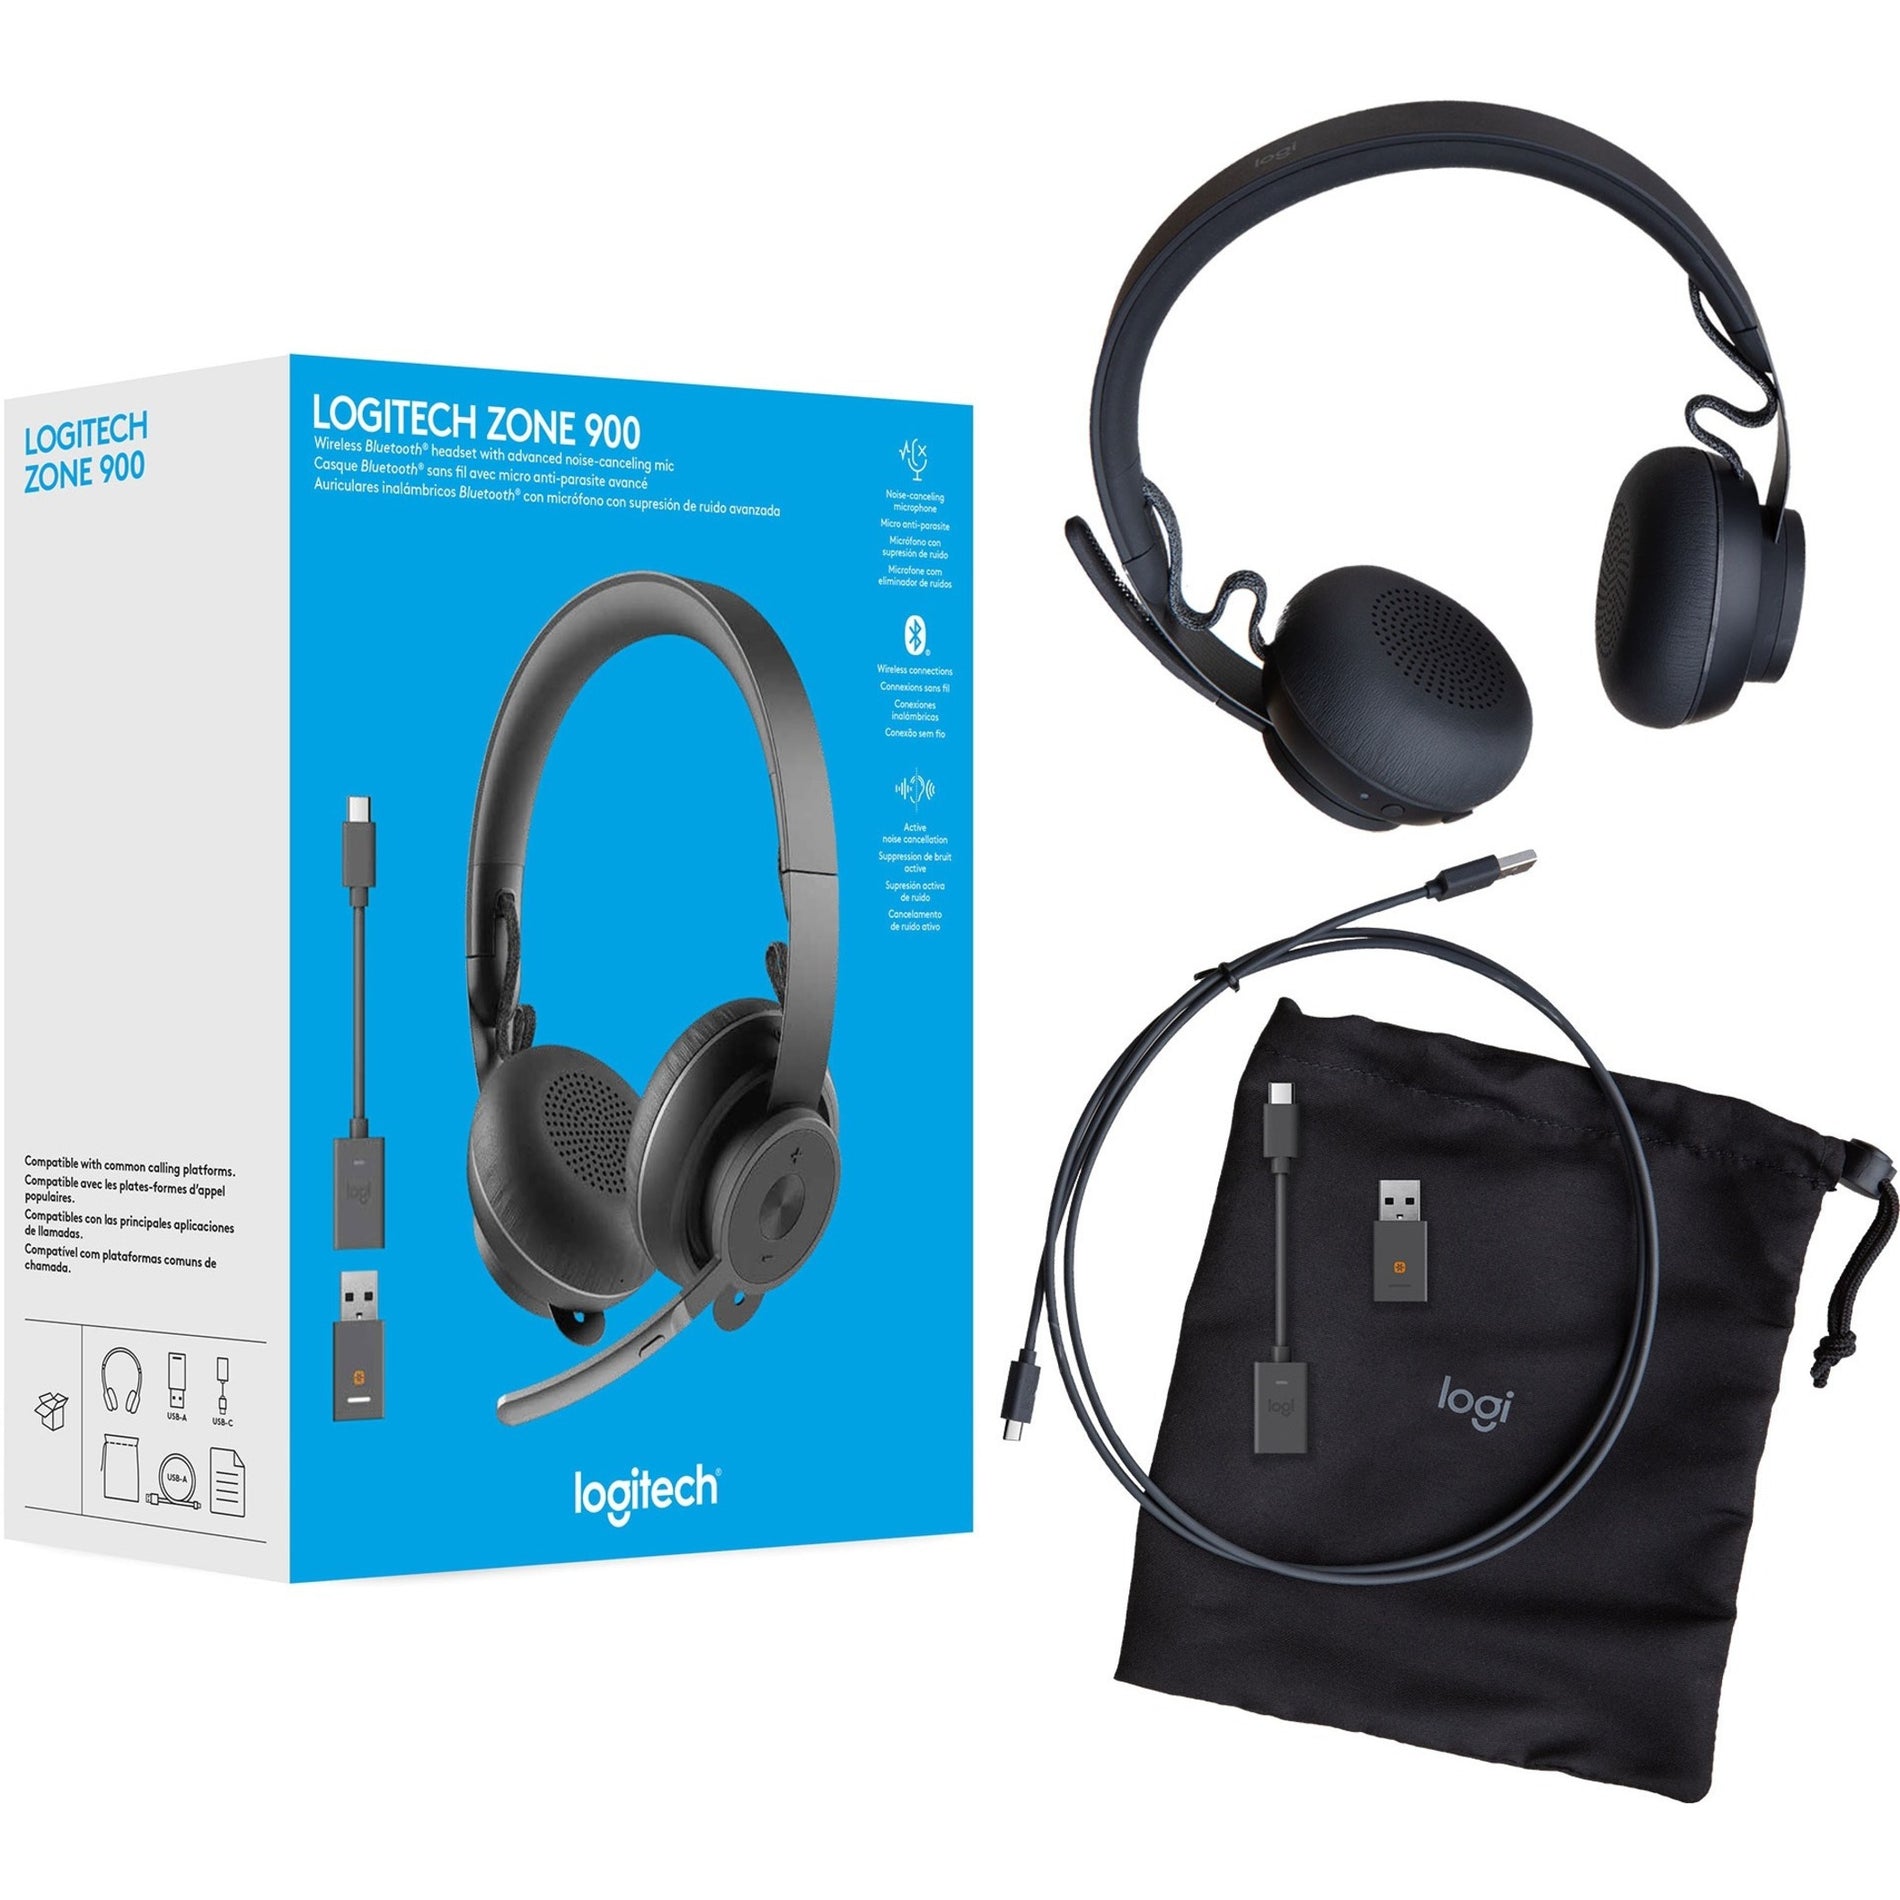 Logitech 981-001100 Zone 900 Headset, Wireless Bluetooth Over-Ear Headset with Noise Canceling, Graphite